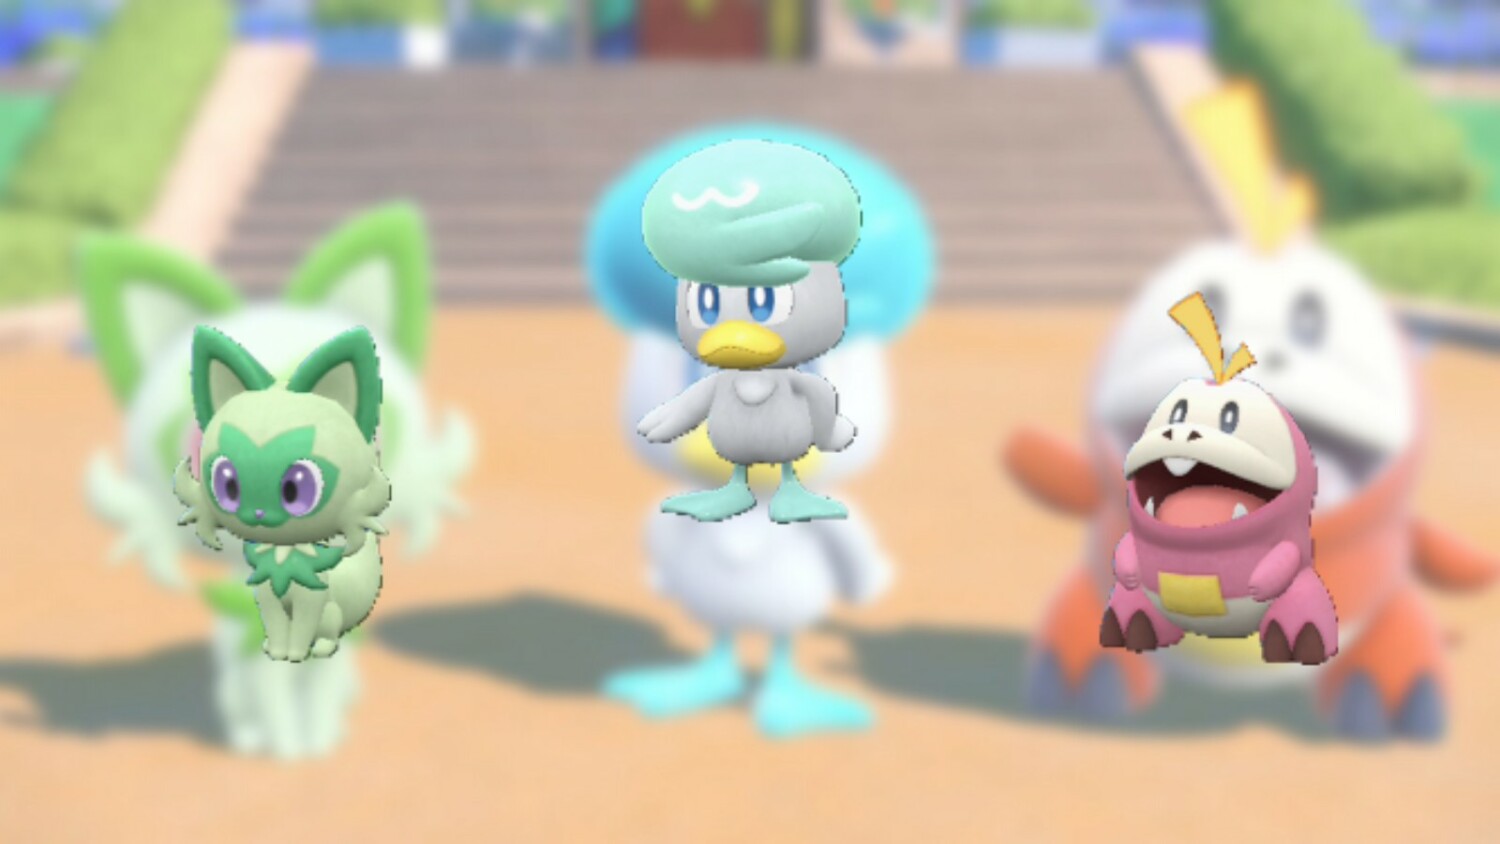 How To Get The Shiny Charm In Pokemon Scarlet & Violet